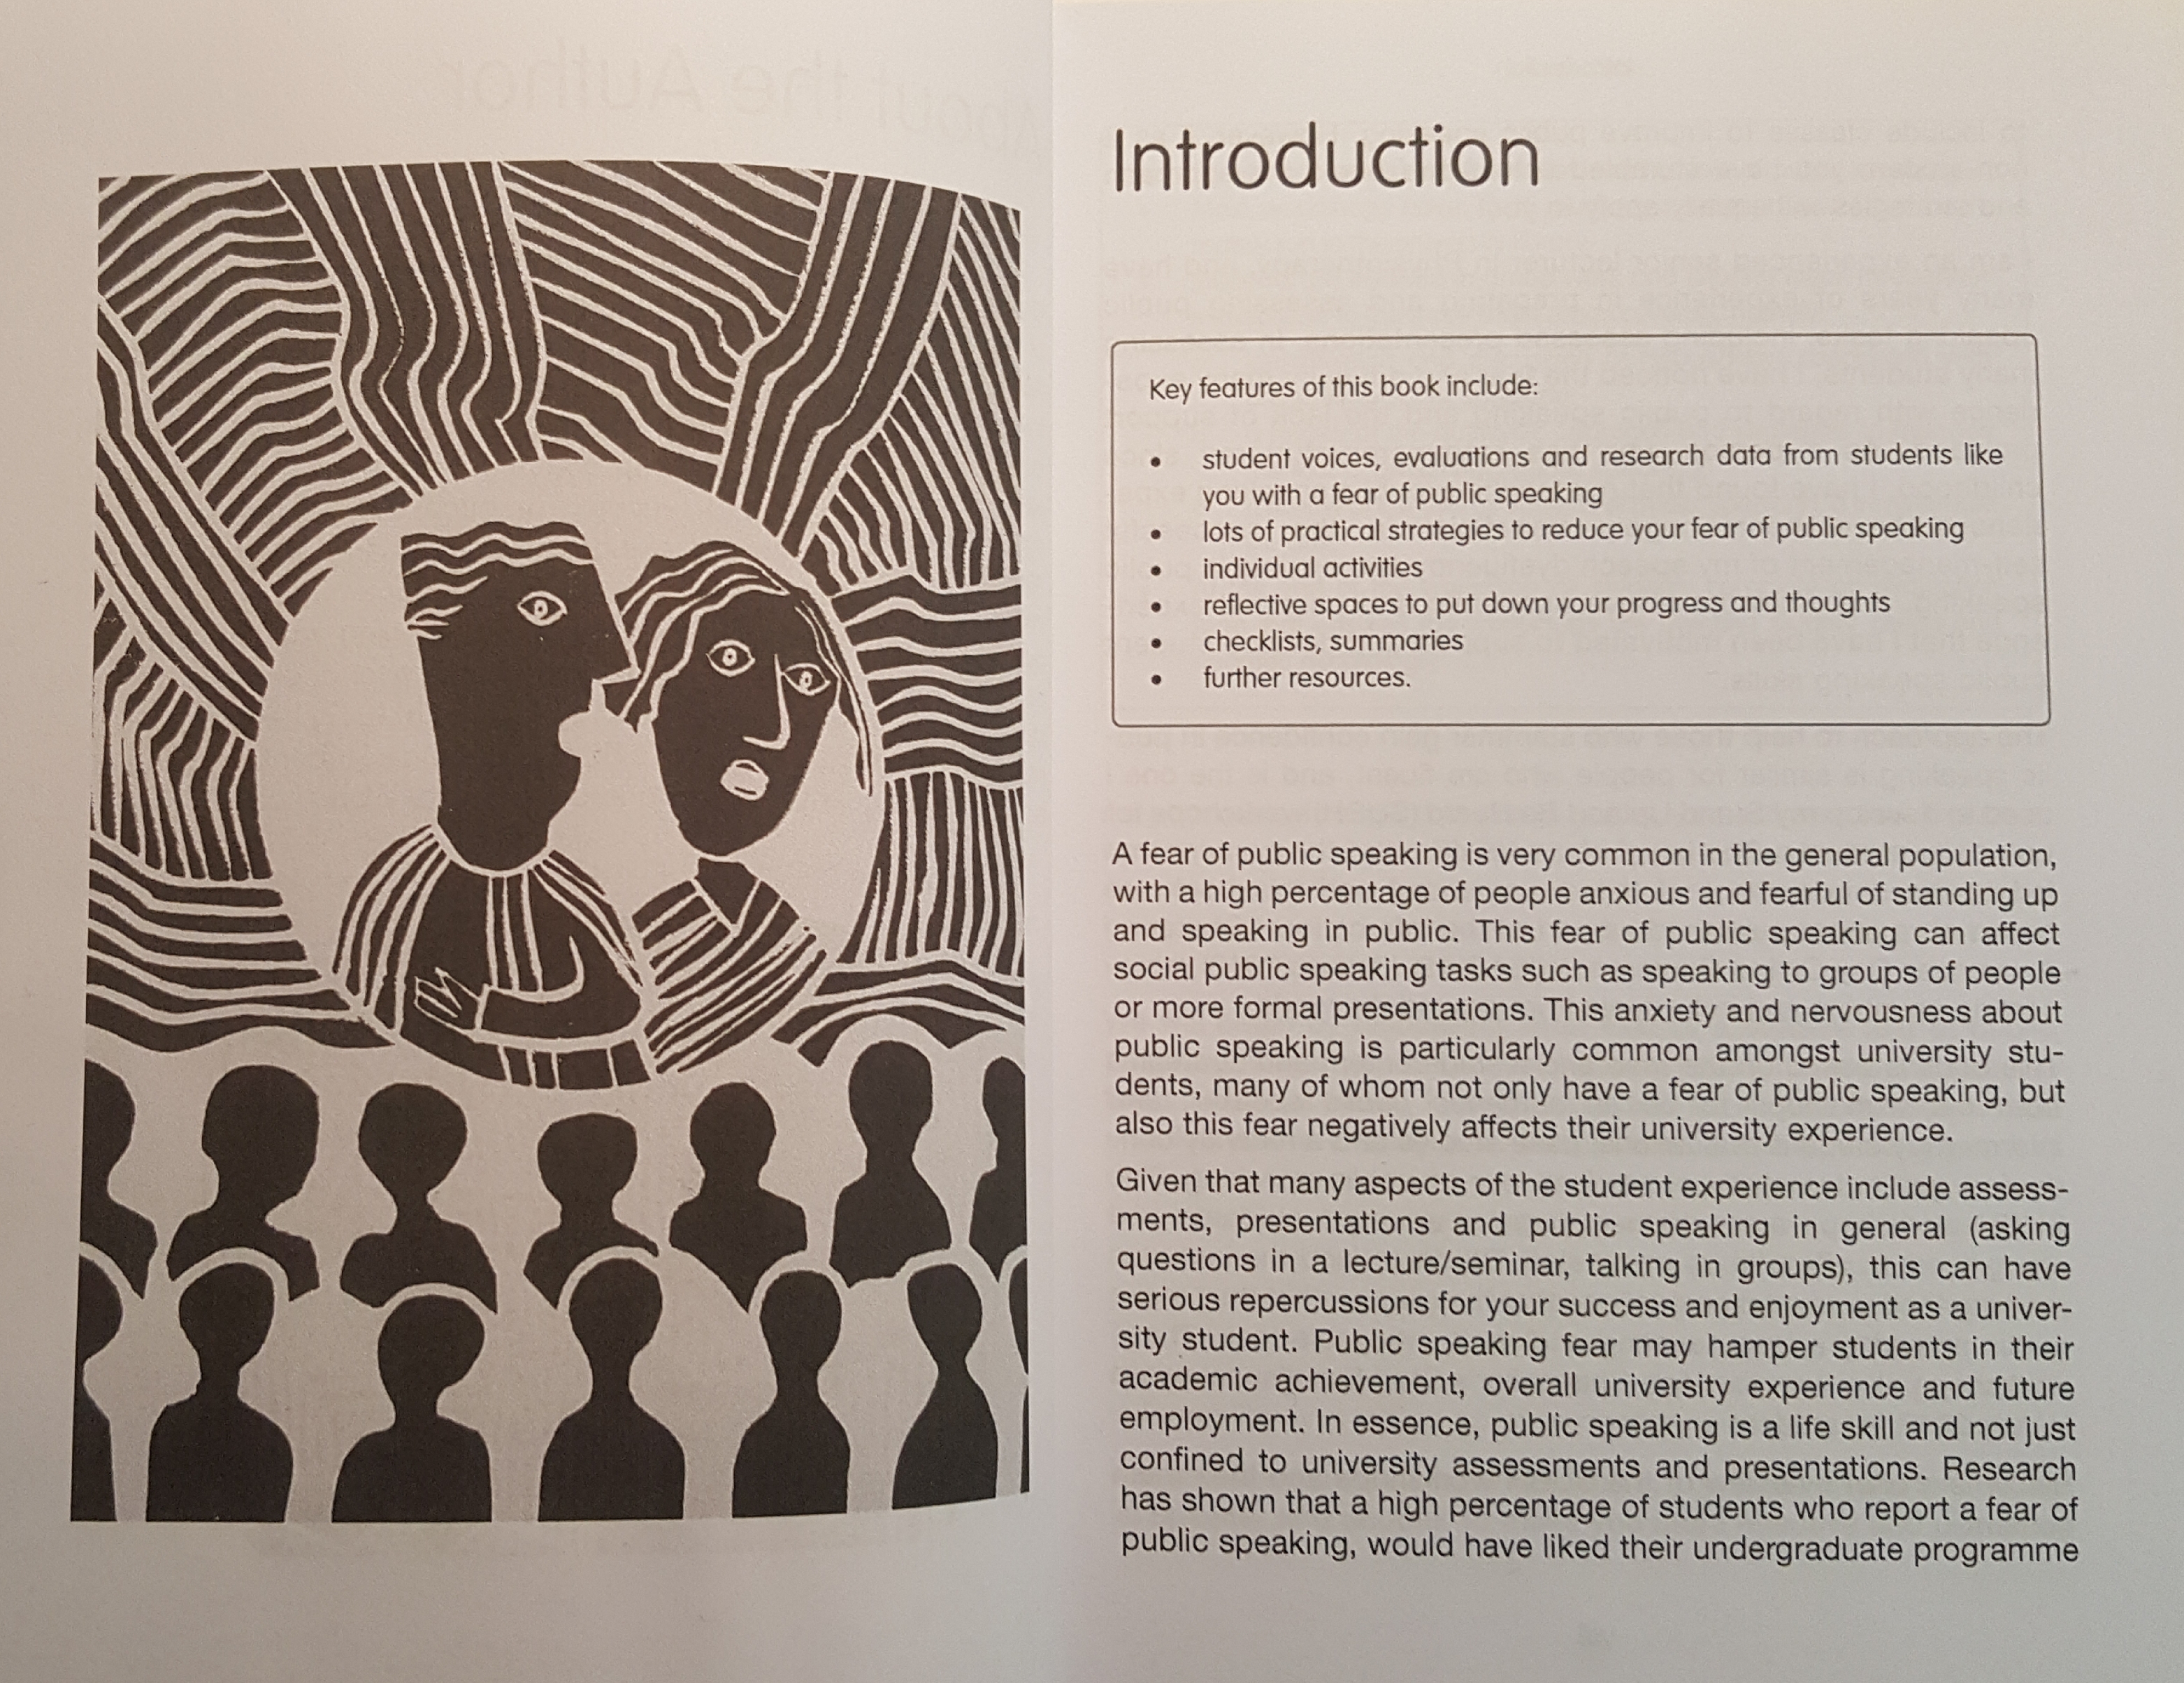 The book's introduction pages